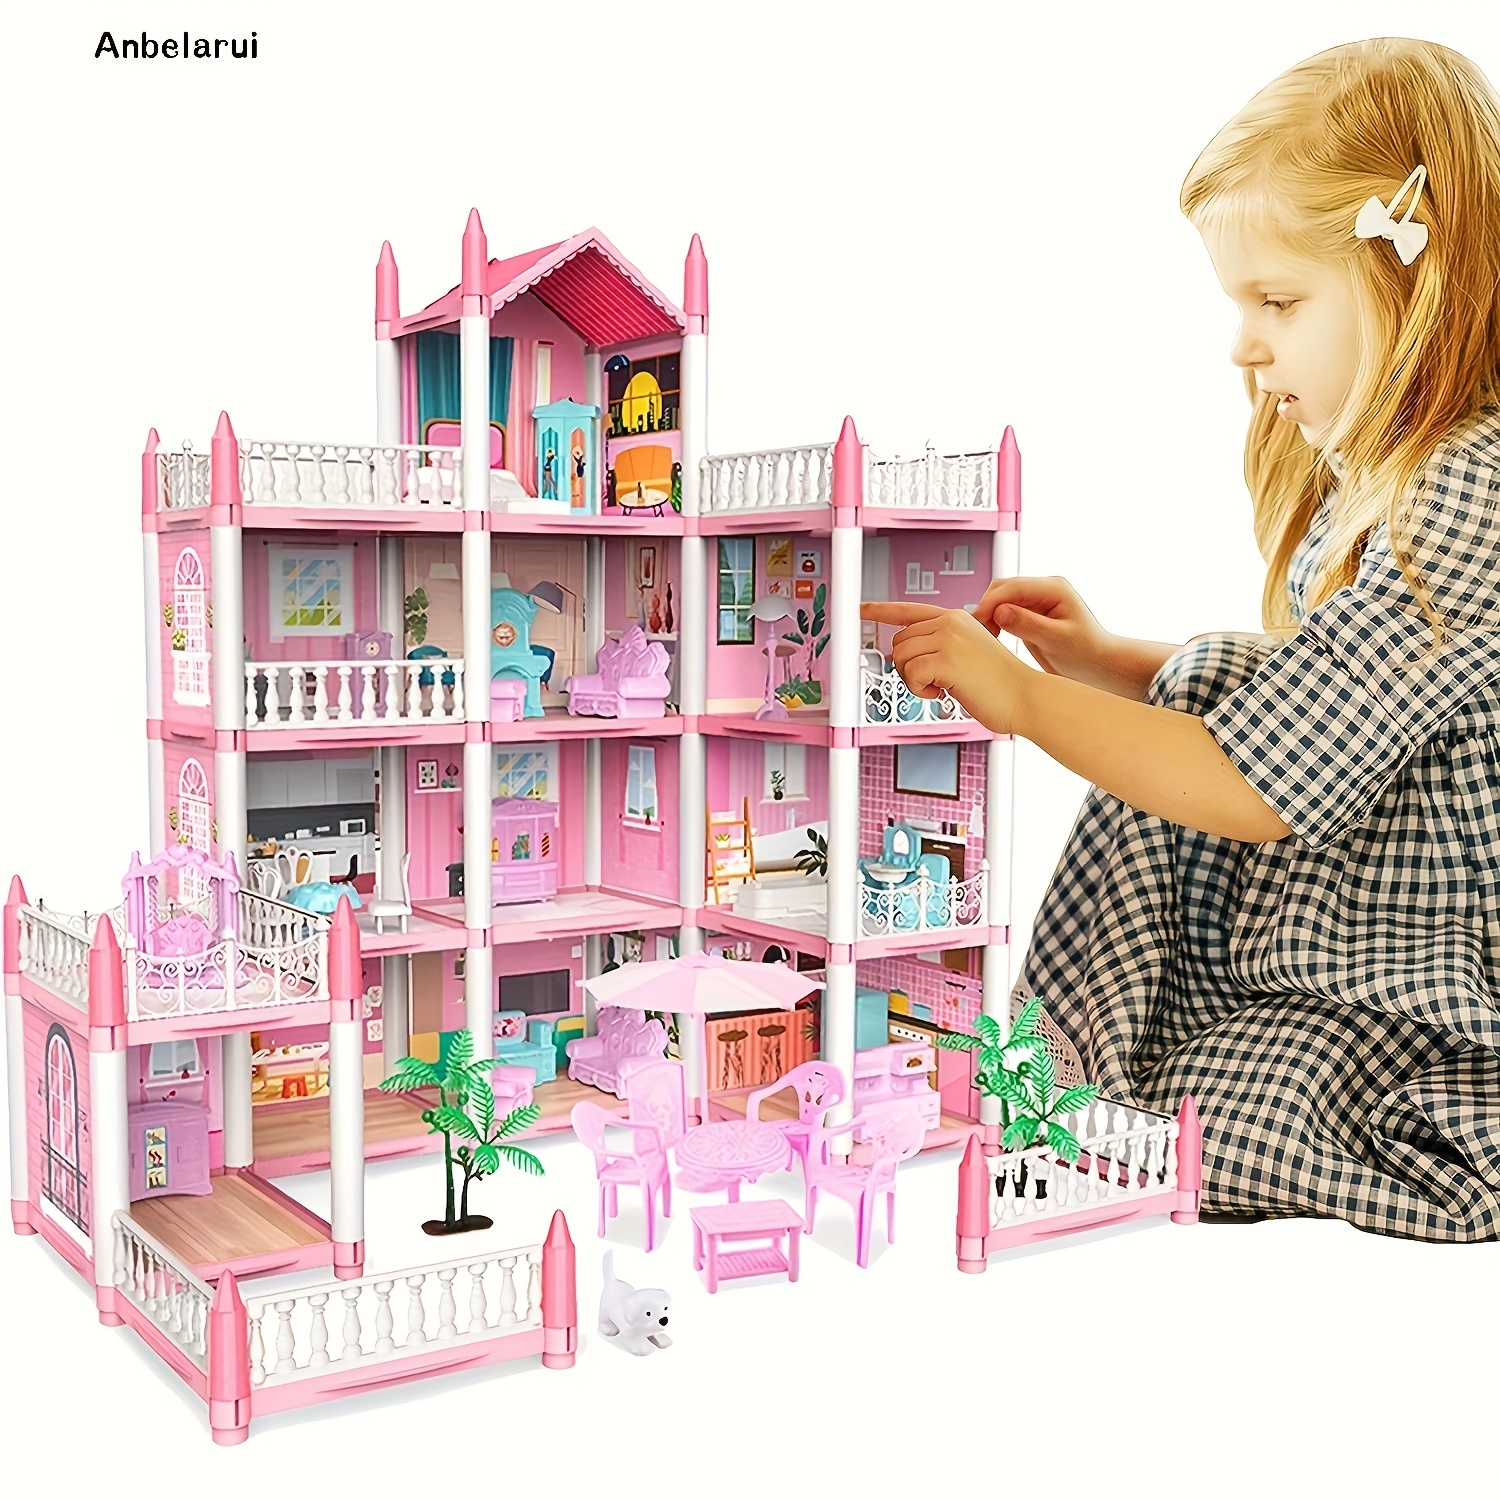 

Doll House Set With 11 Rooms And Furniture Accessories, Pink Play Dream House, Diy Building Pretend Play Doll House, Pretend Cottage Toy House, Christmas, Halloween, Thanksgiving Day Gift Easter Gift